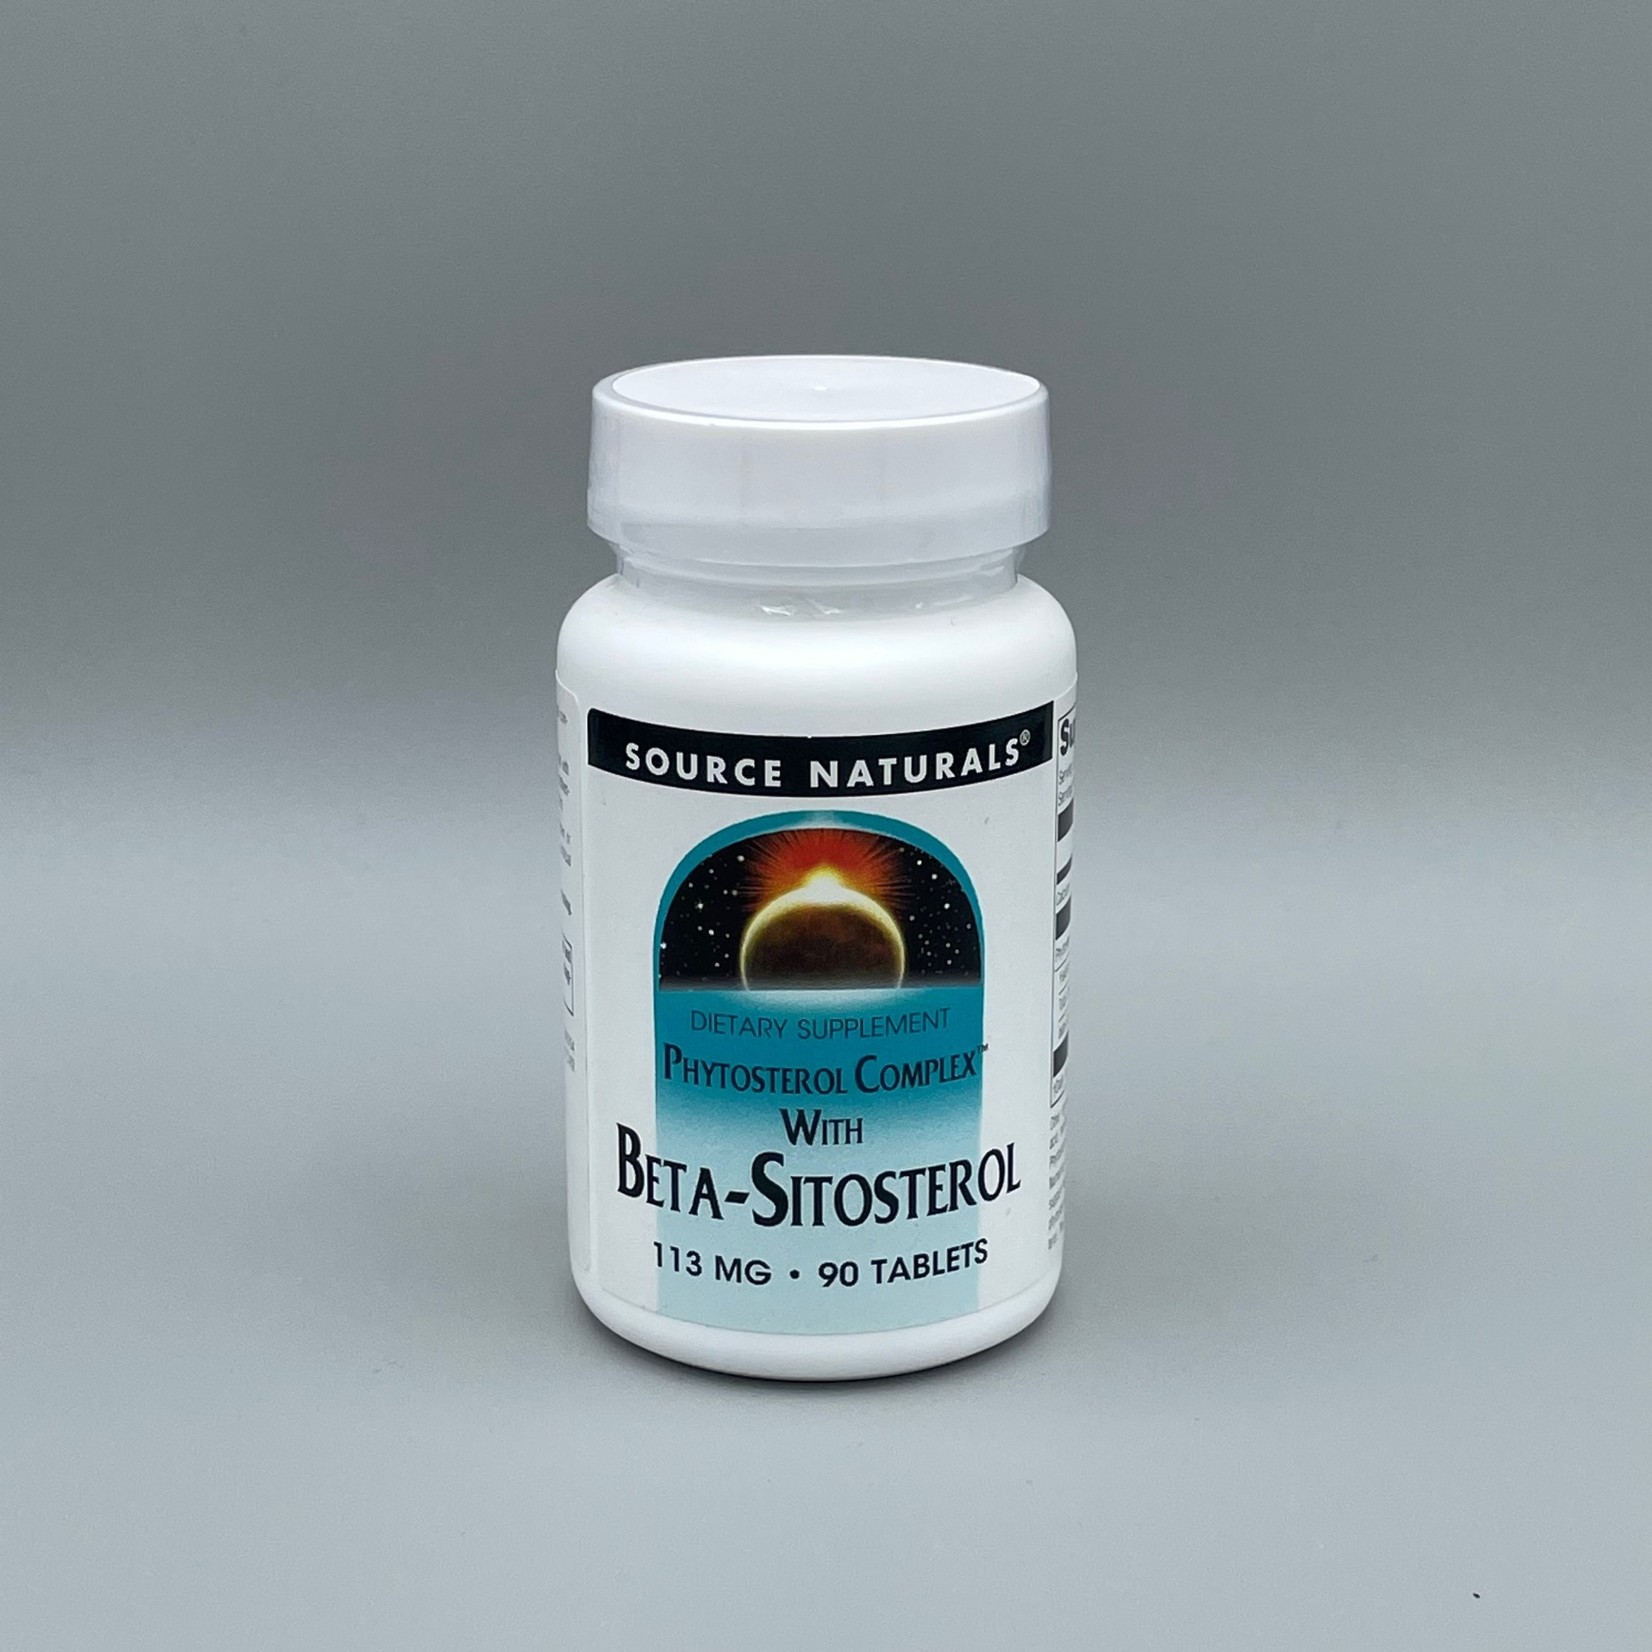 Source Naturals Beta-Sitosterol (Phytosterol Complex) - 113 mg, 90 Tablets